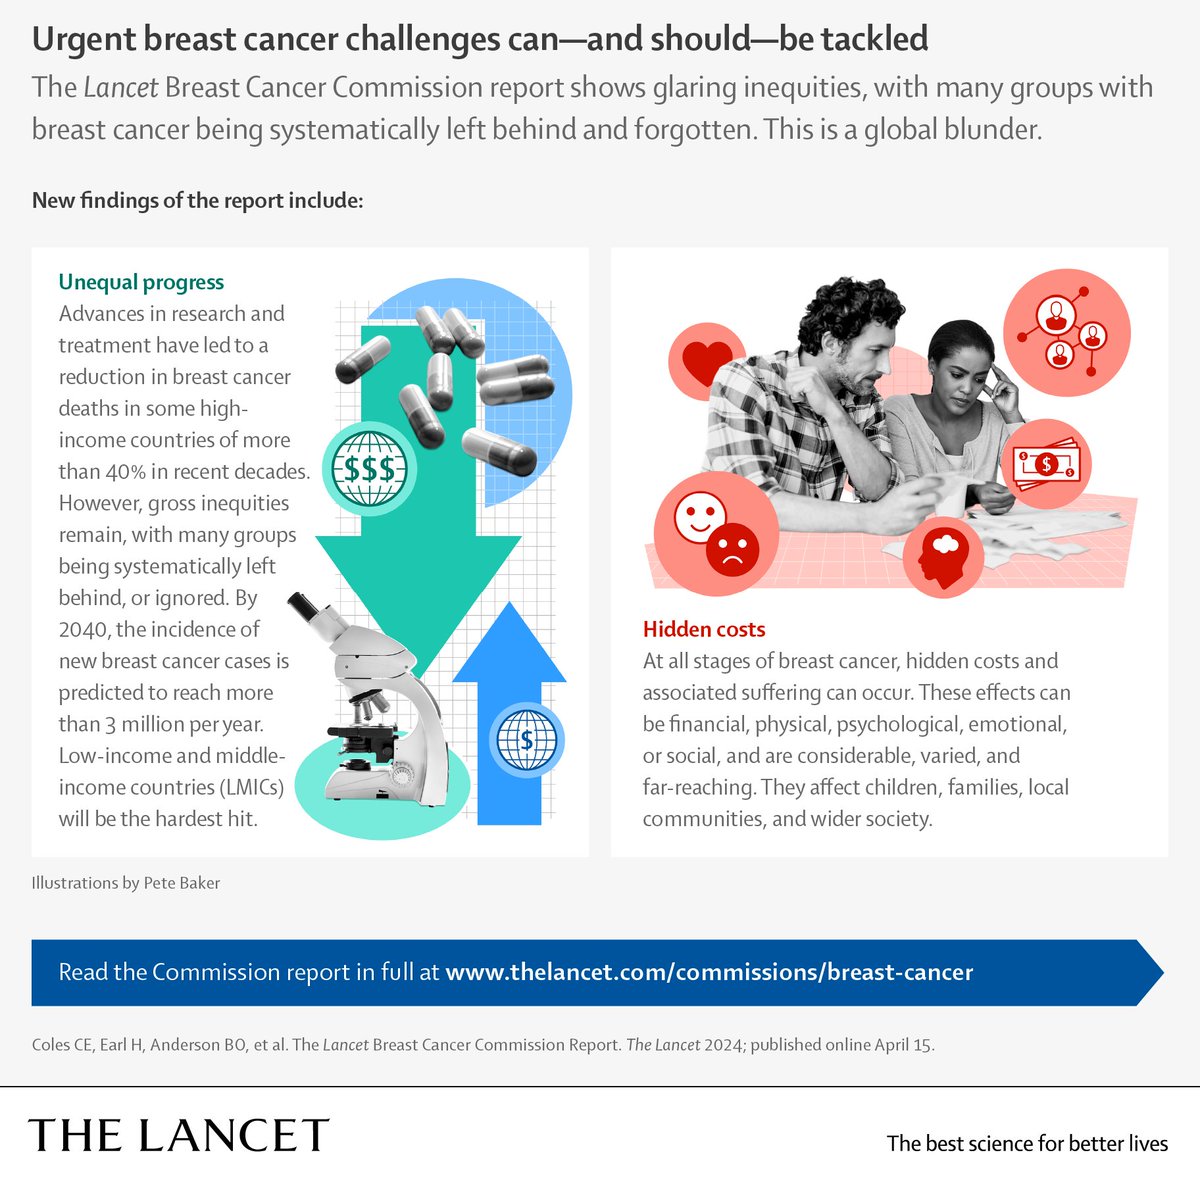 Many people with breast cancer ‘systematically left behind’ due to inaction on inequities & hidden suffering, says new Lancet Commission. Explore authors’ recommendations to address these urgent challenges in #BreastCancer ▶️ hubs.li/Q02sX1Gs0